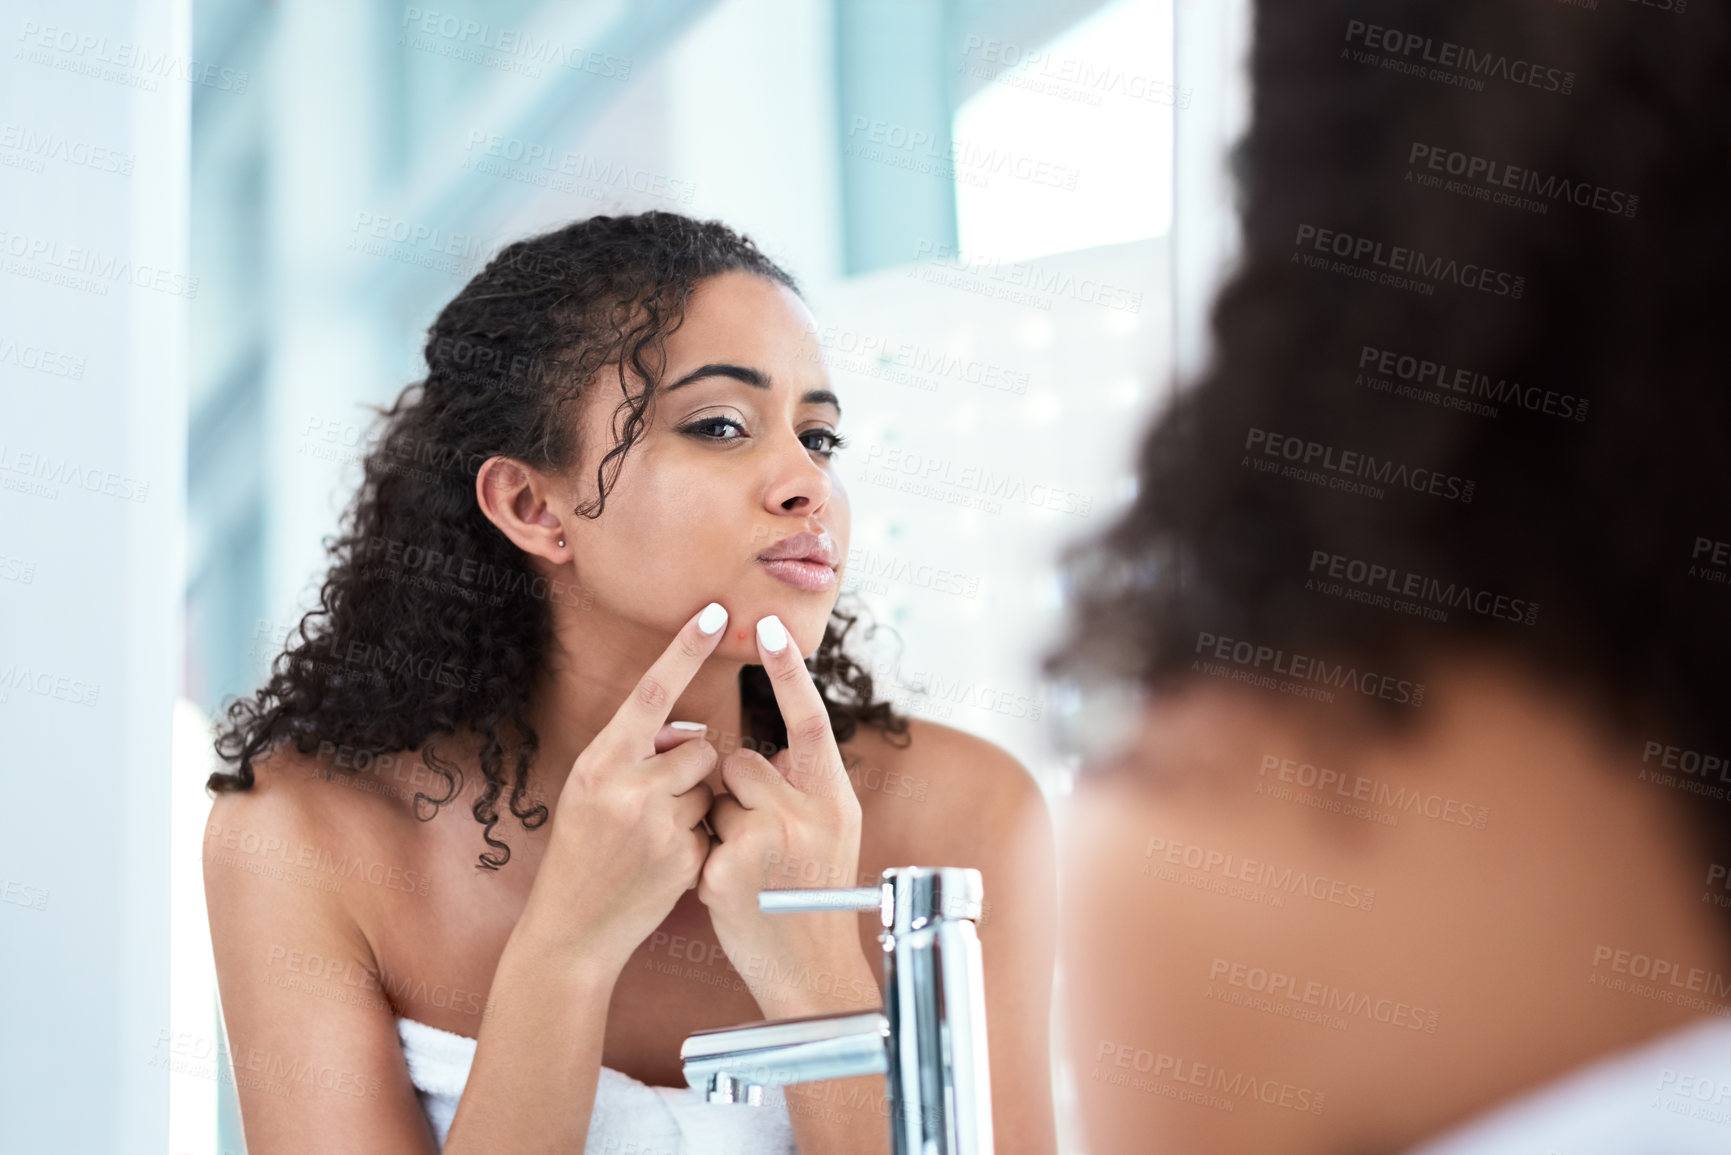 Buy stock photo Cropped shot of a beautiful young woman squeezing a pimple while looking in the mirror